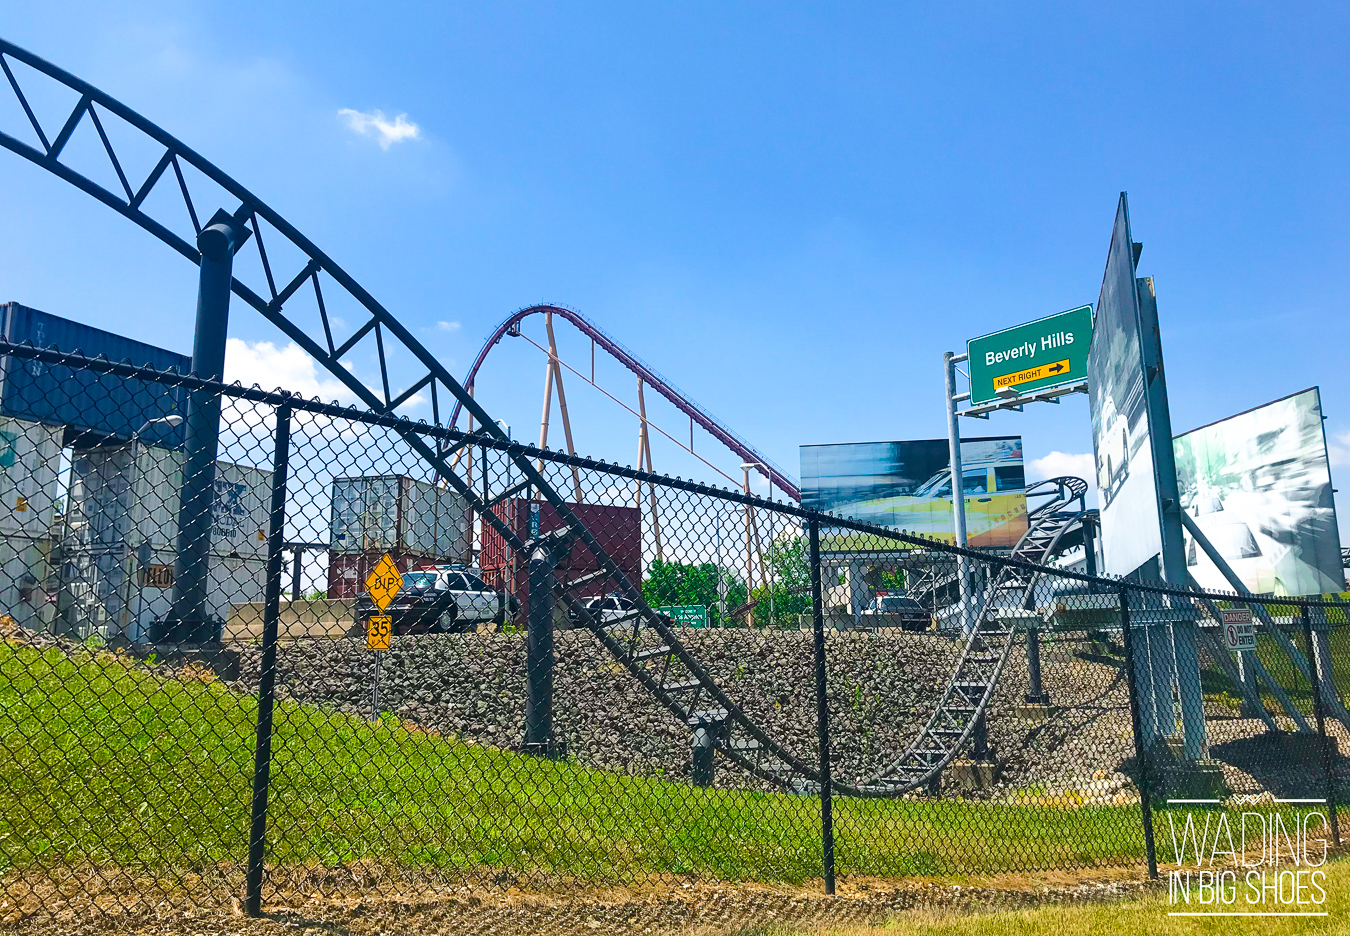 Wading in Big Shoes - Just How Scary Are The Roller Coasters at Kings Island? - Ride Guide & Review